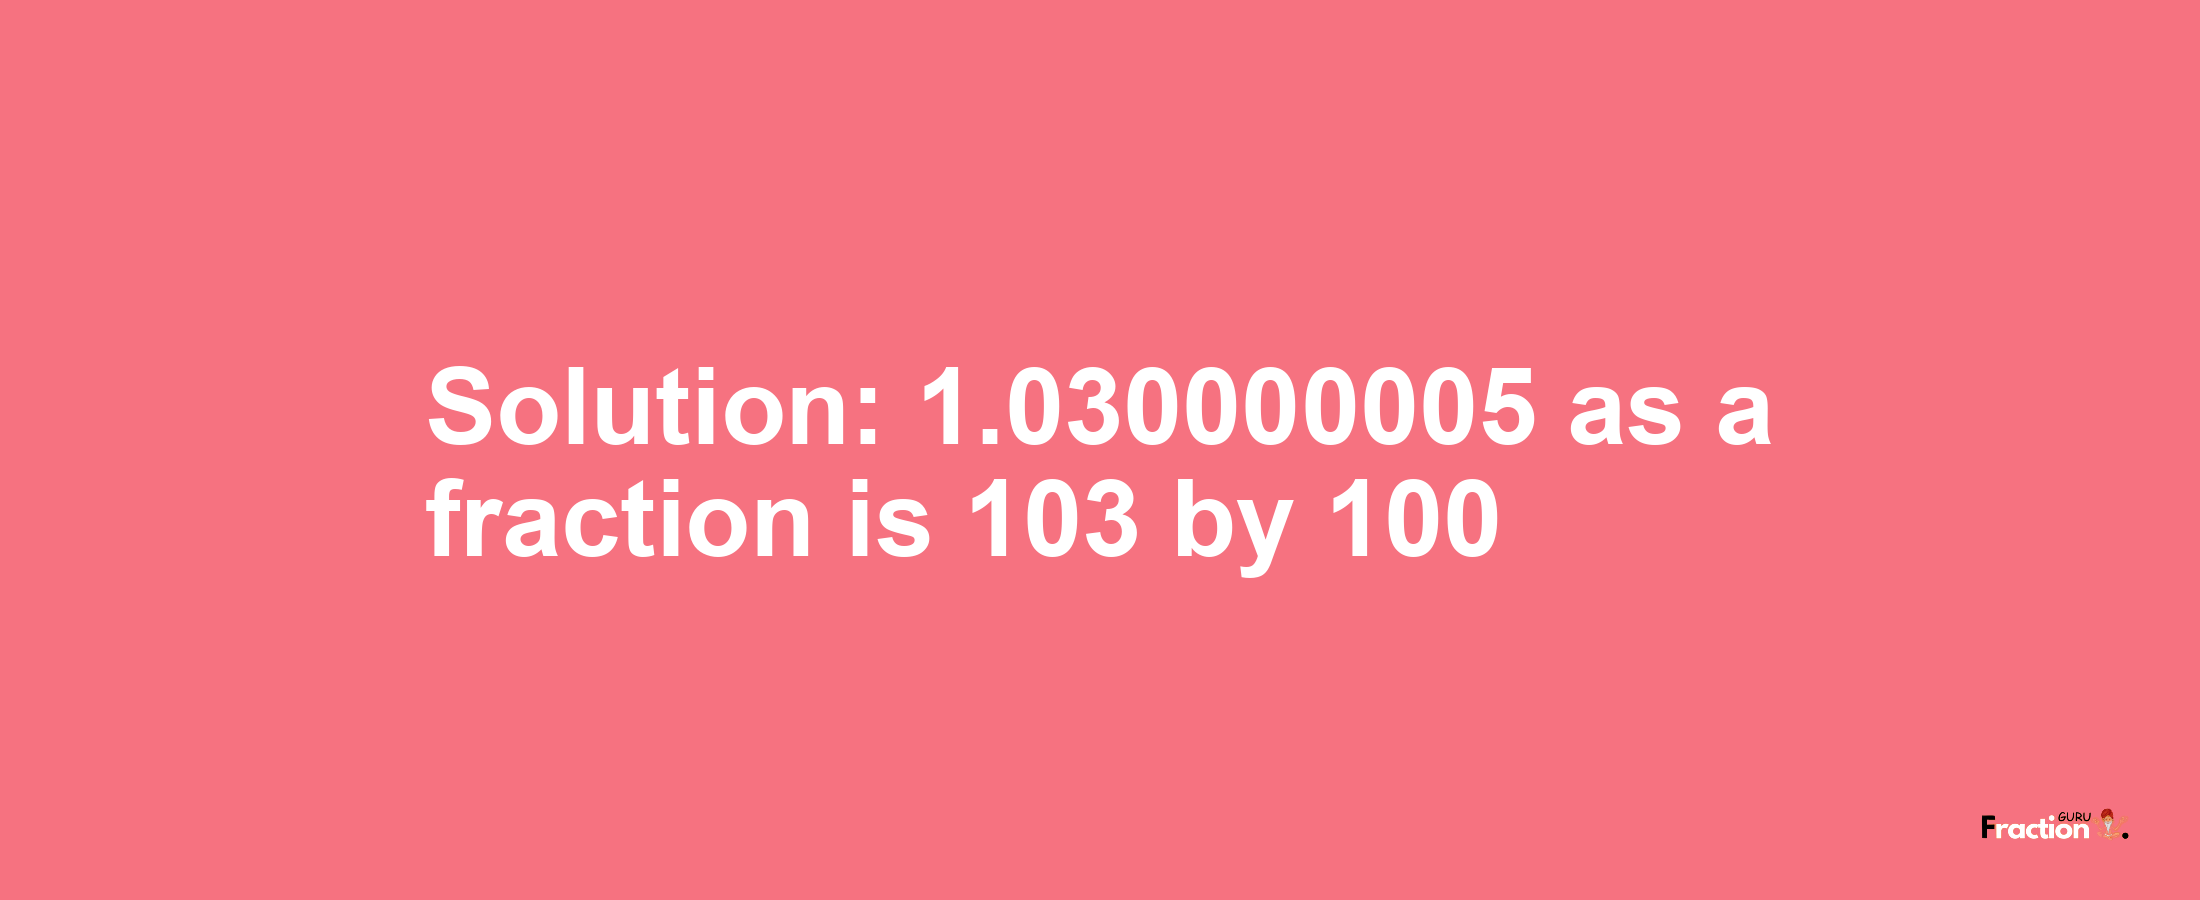 Solution:1.030000005 as a fraction is 103/100